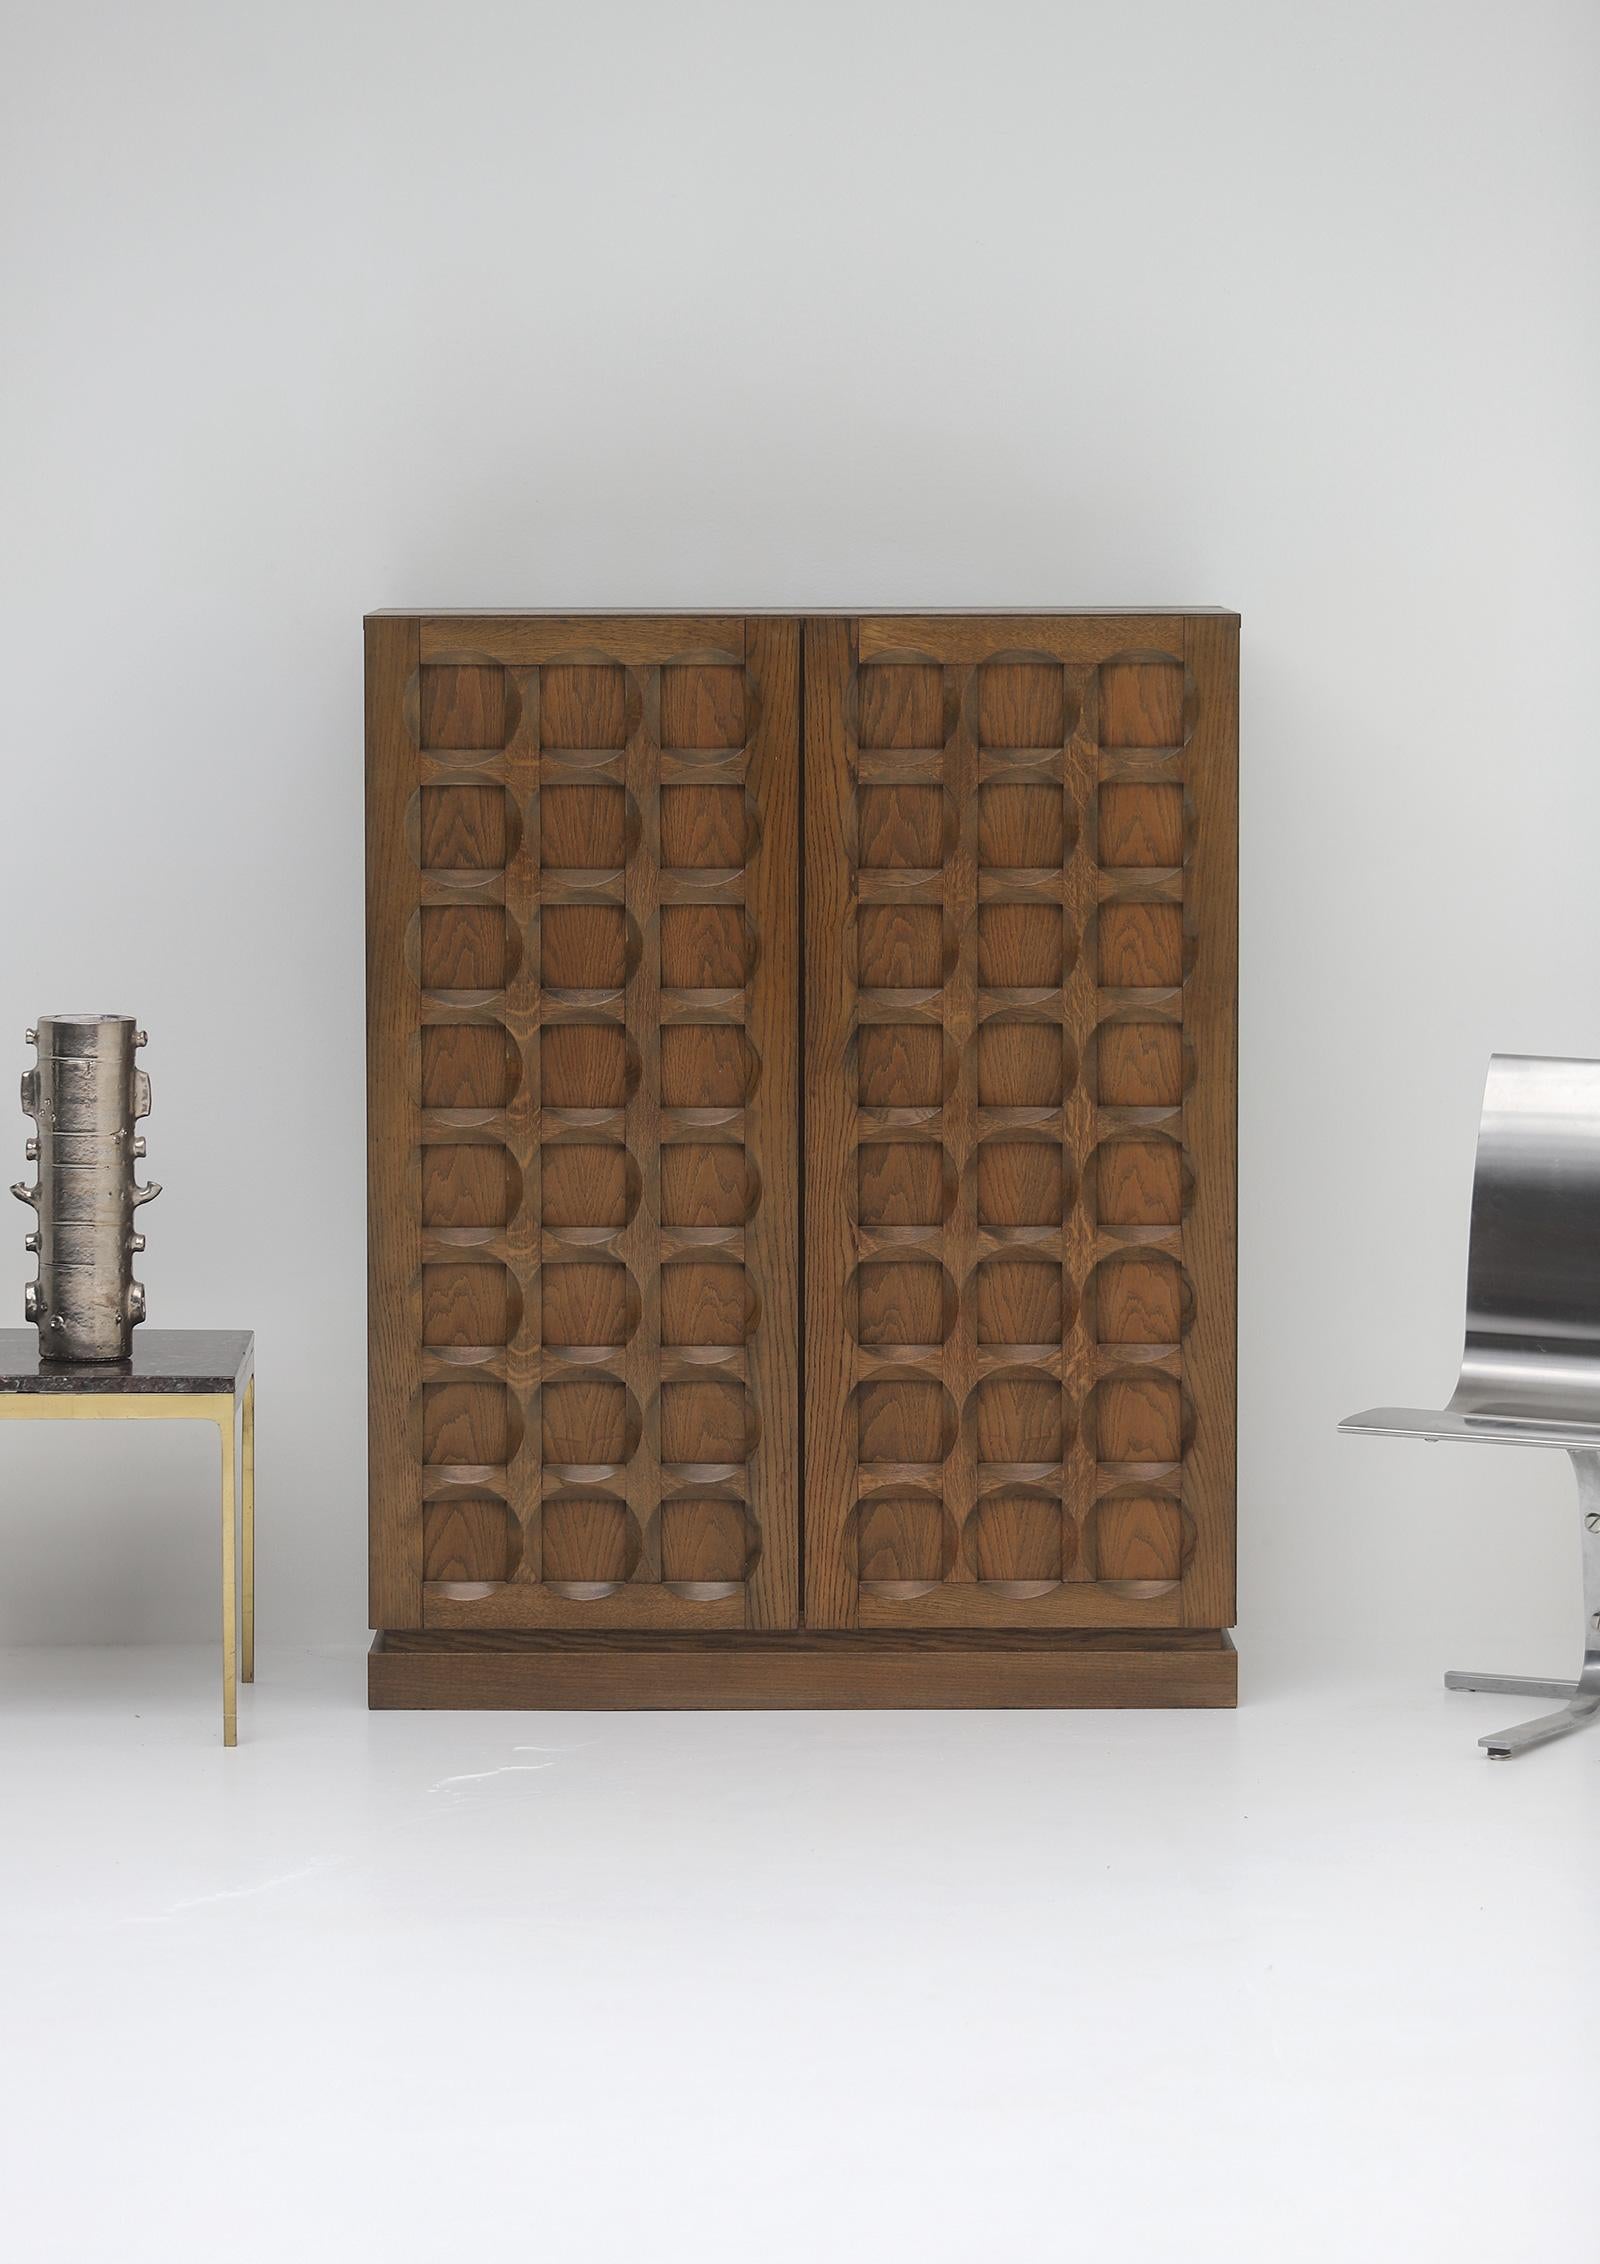 European 1970s Defour modern cabinet with graphical door panels